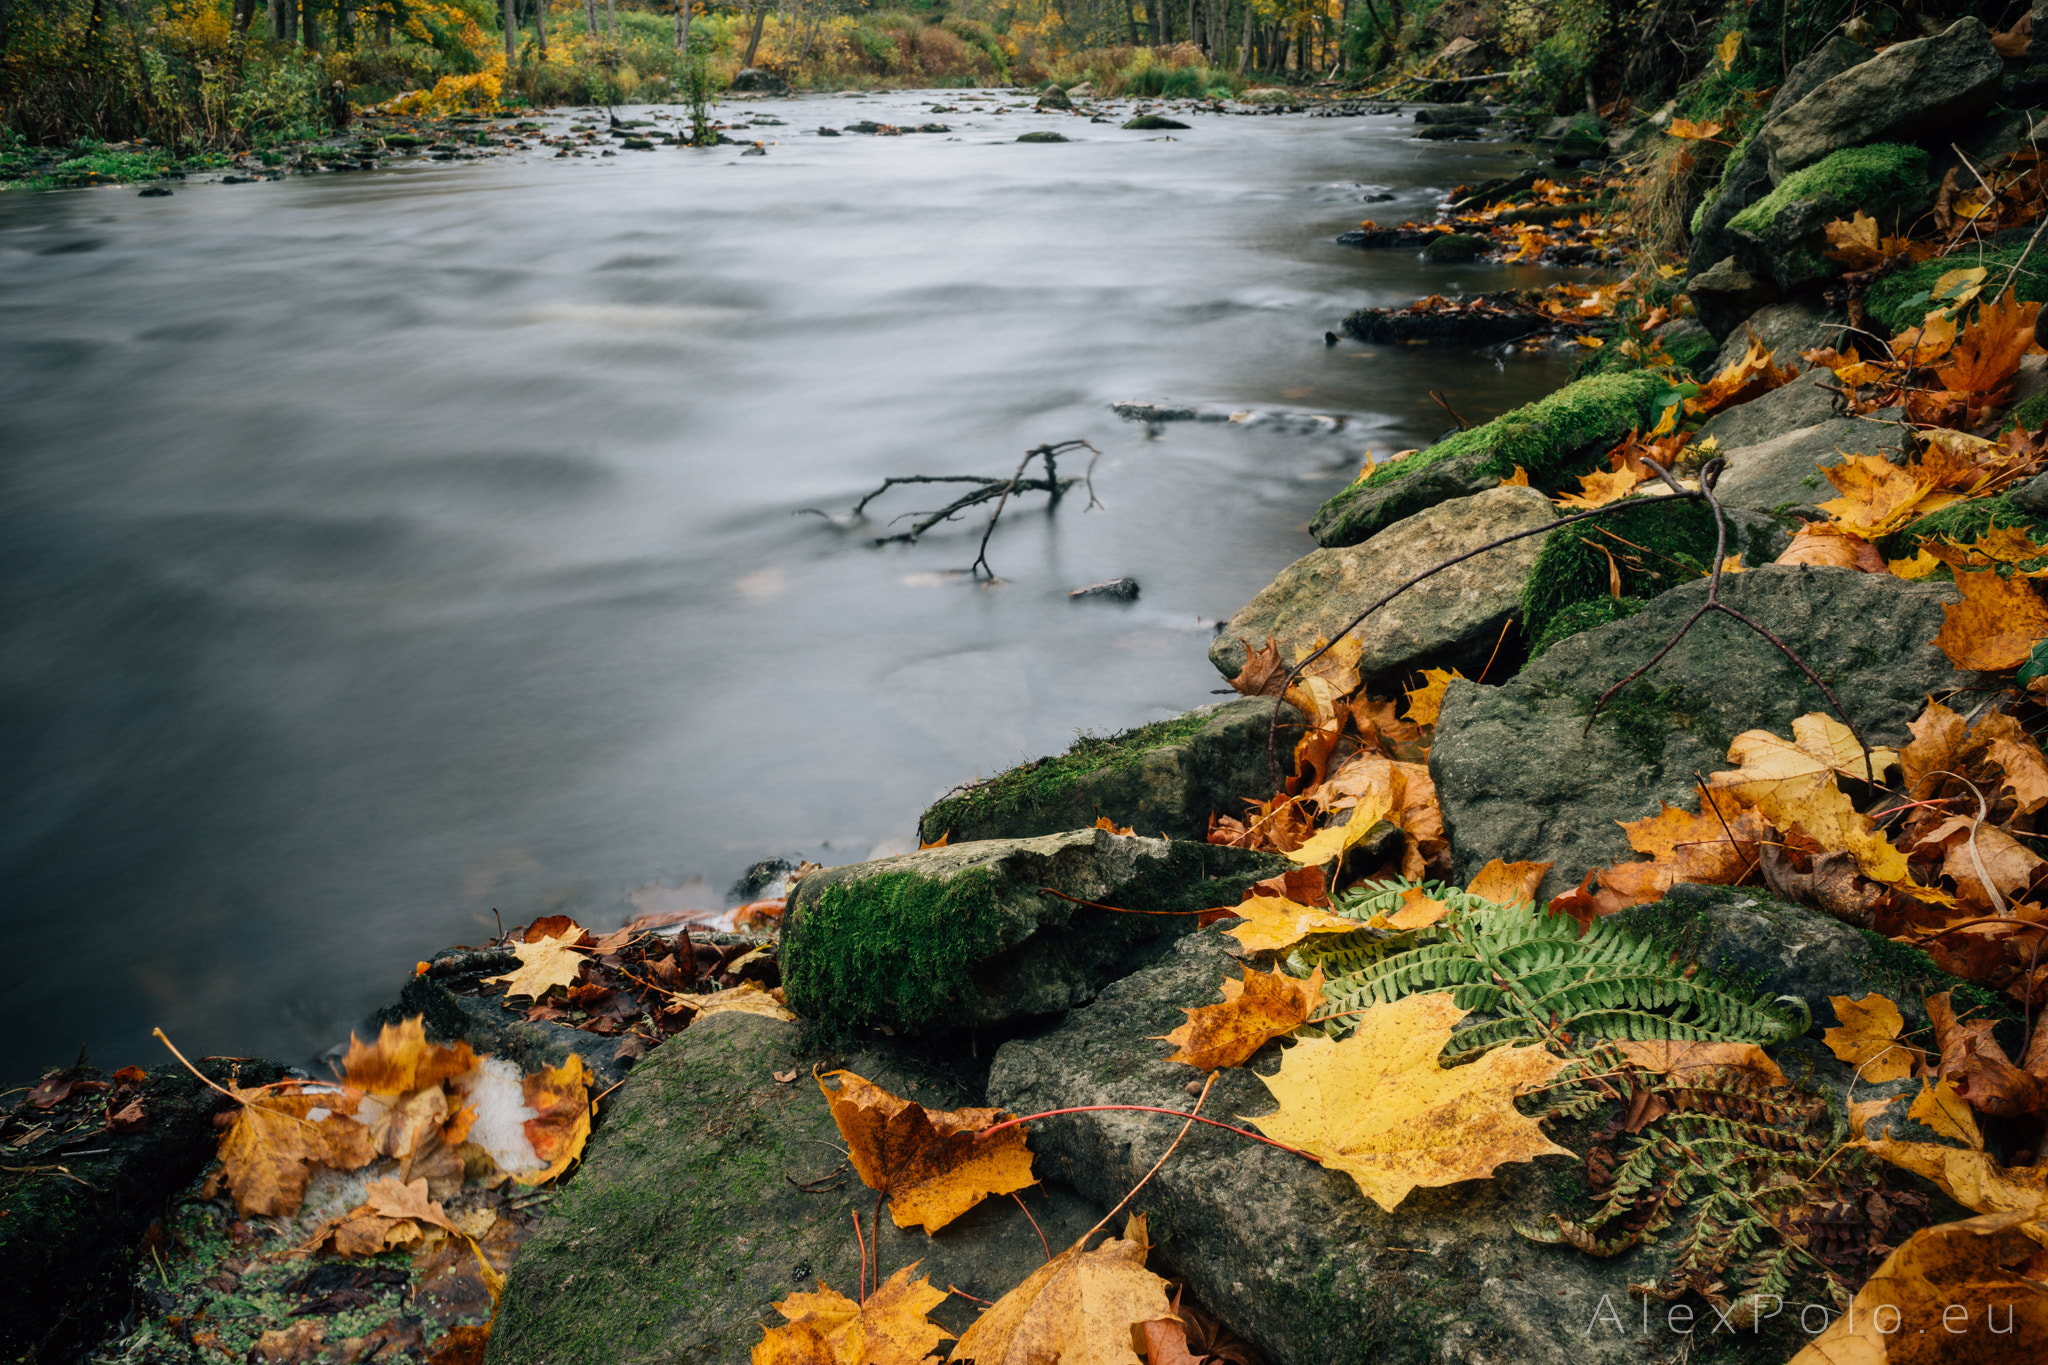 General 2048x1365 500px Alex Polo fall stones river colorful leaves nature moss landscape